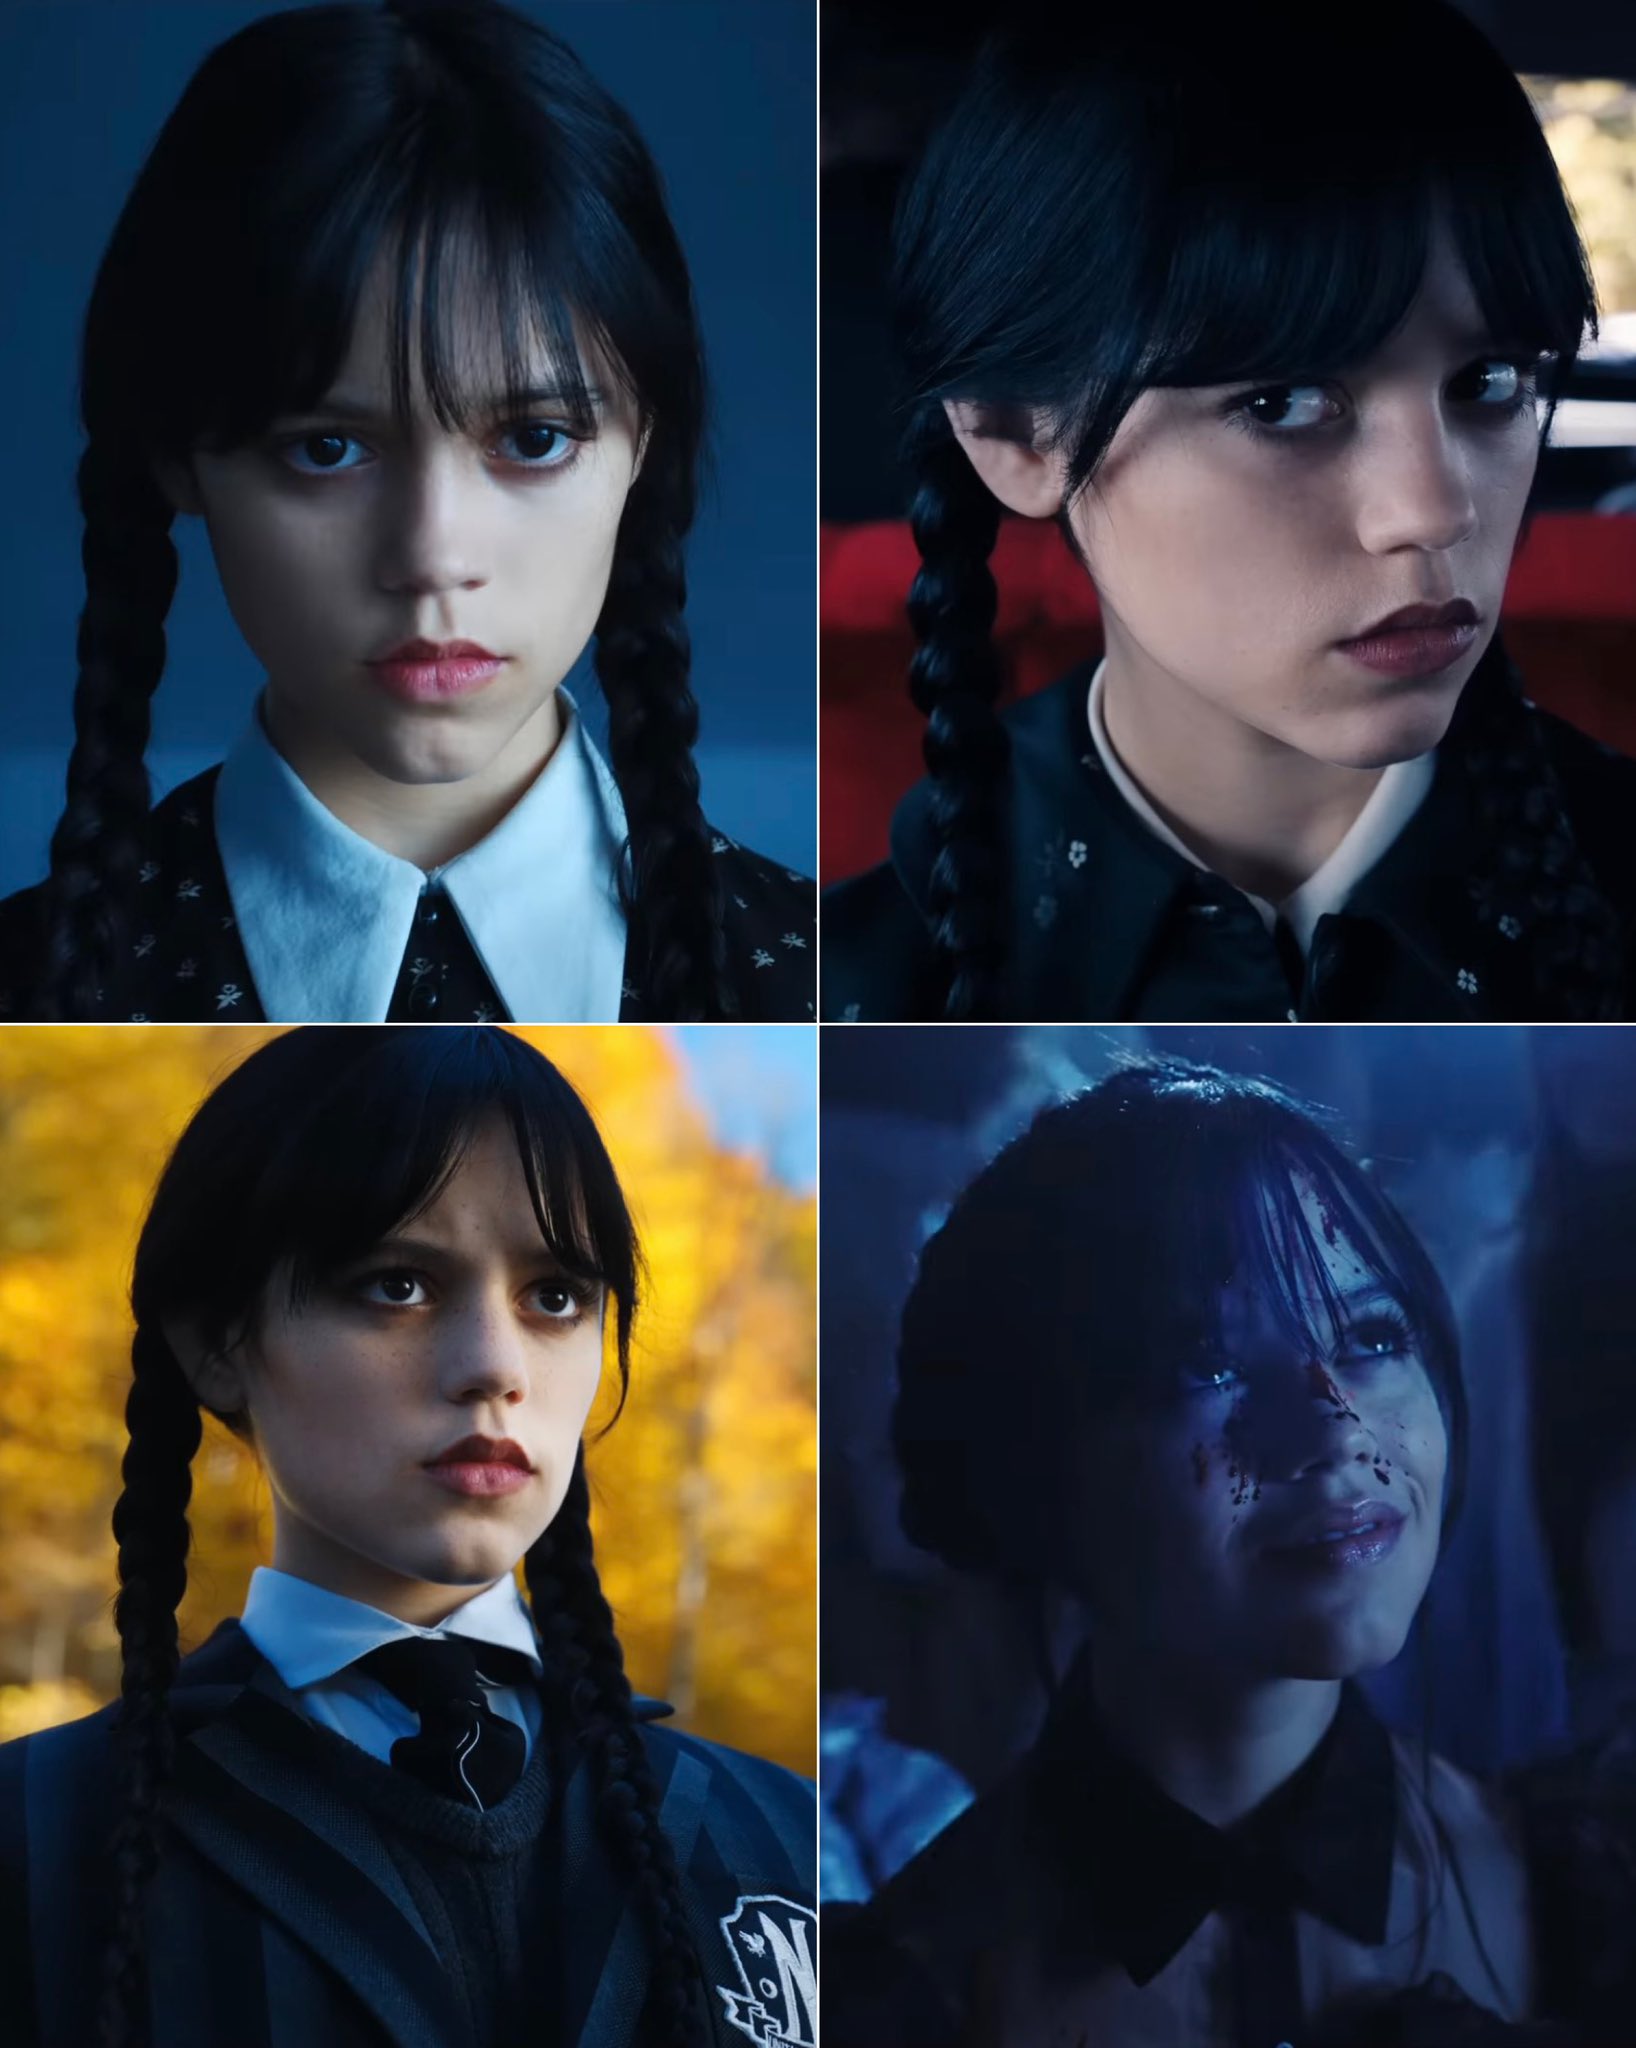 Pop Crave Ortega as Wednesday Addams in Netflix's ' Wednesday' series